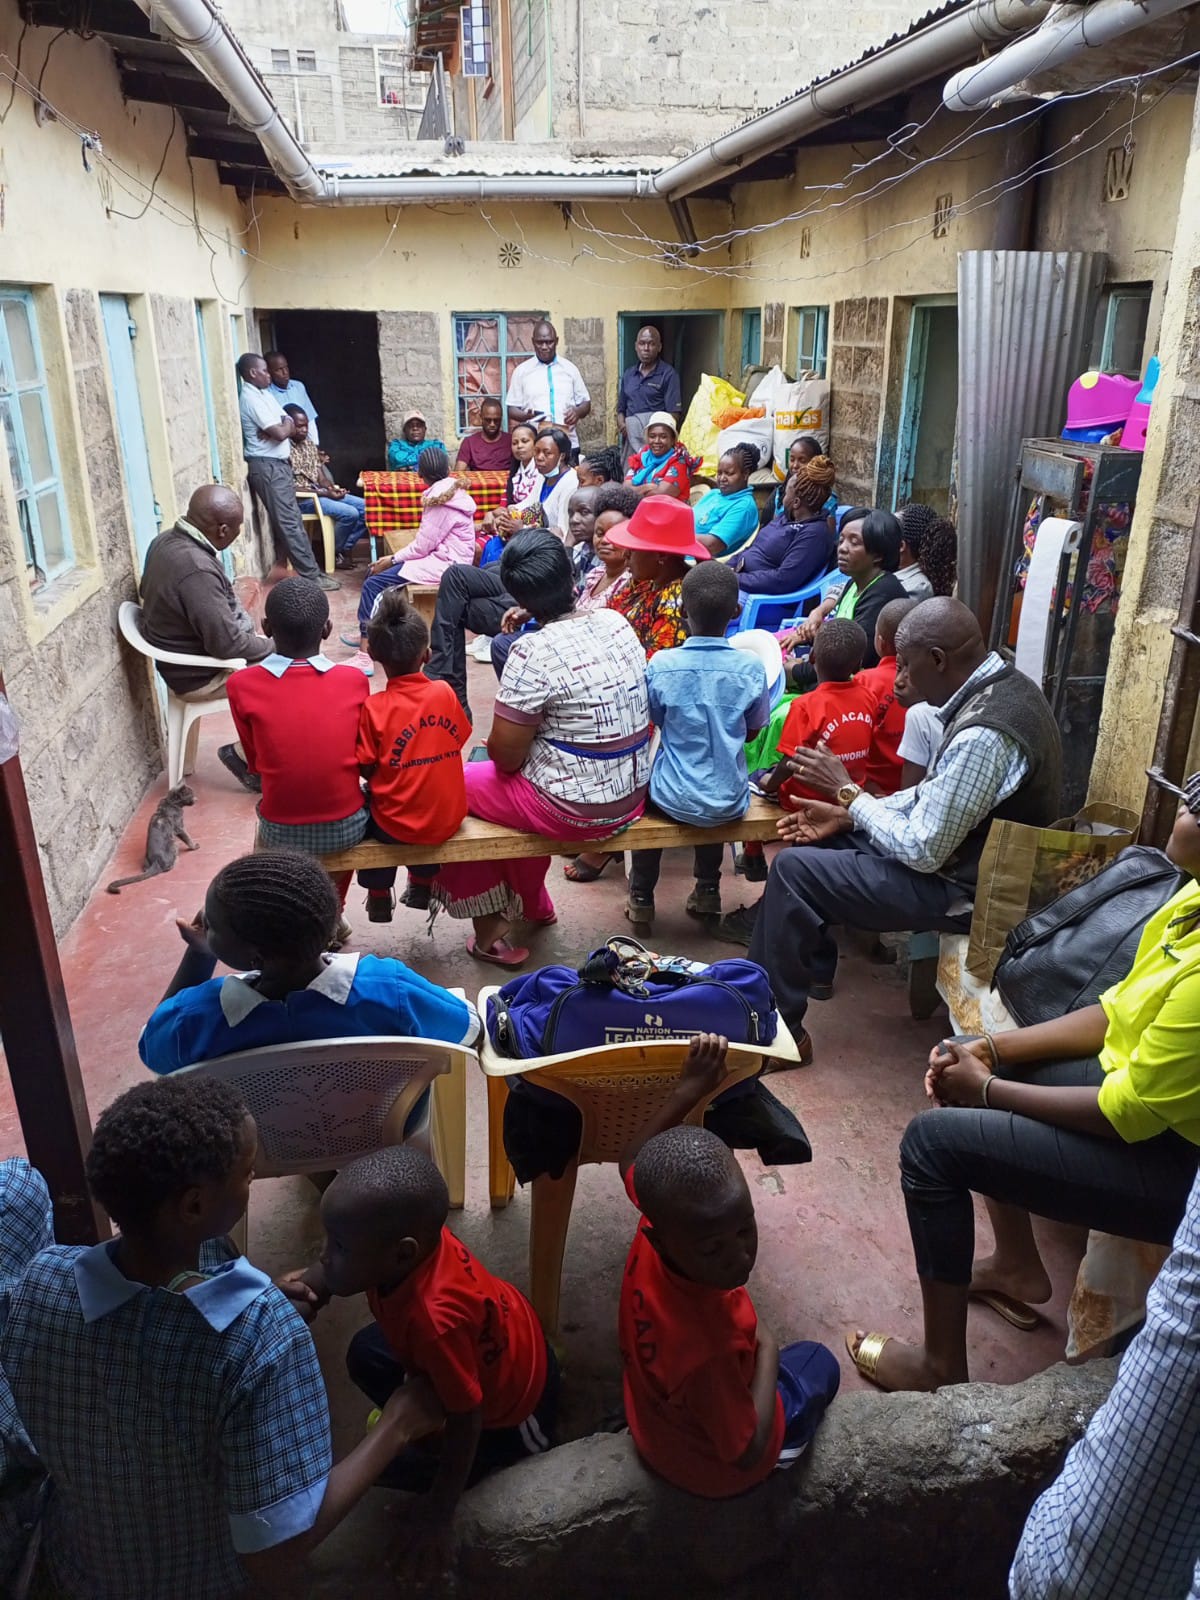 Department of Properties and Utilities Management visits Everlasting Children's Home in Githurai